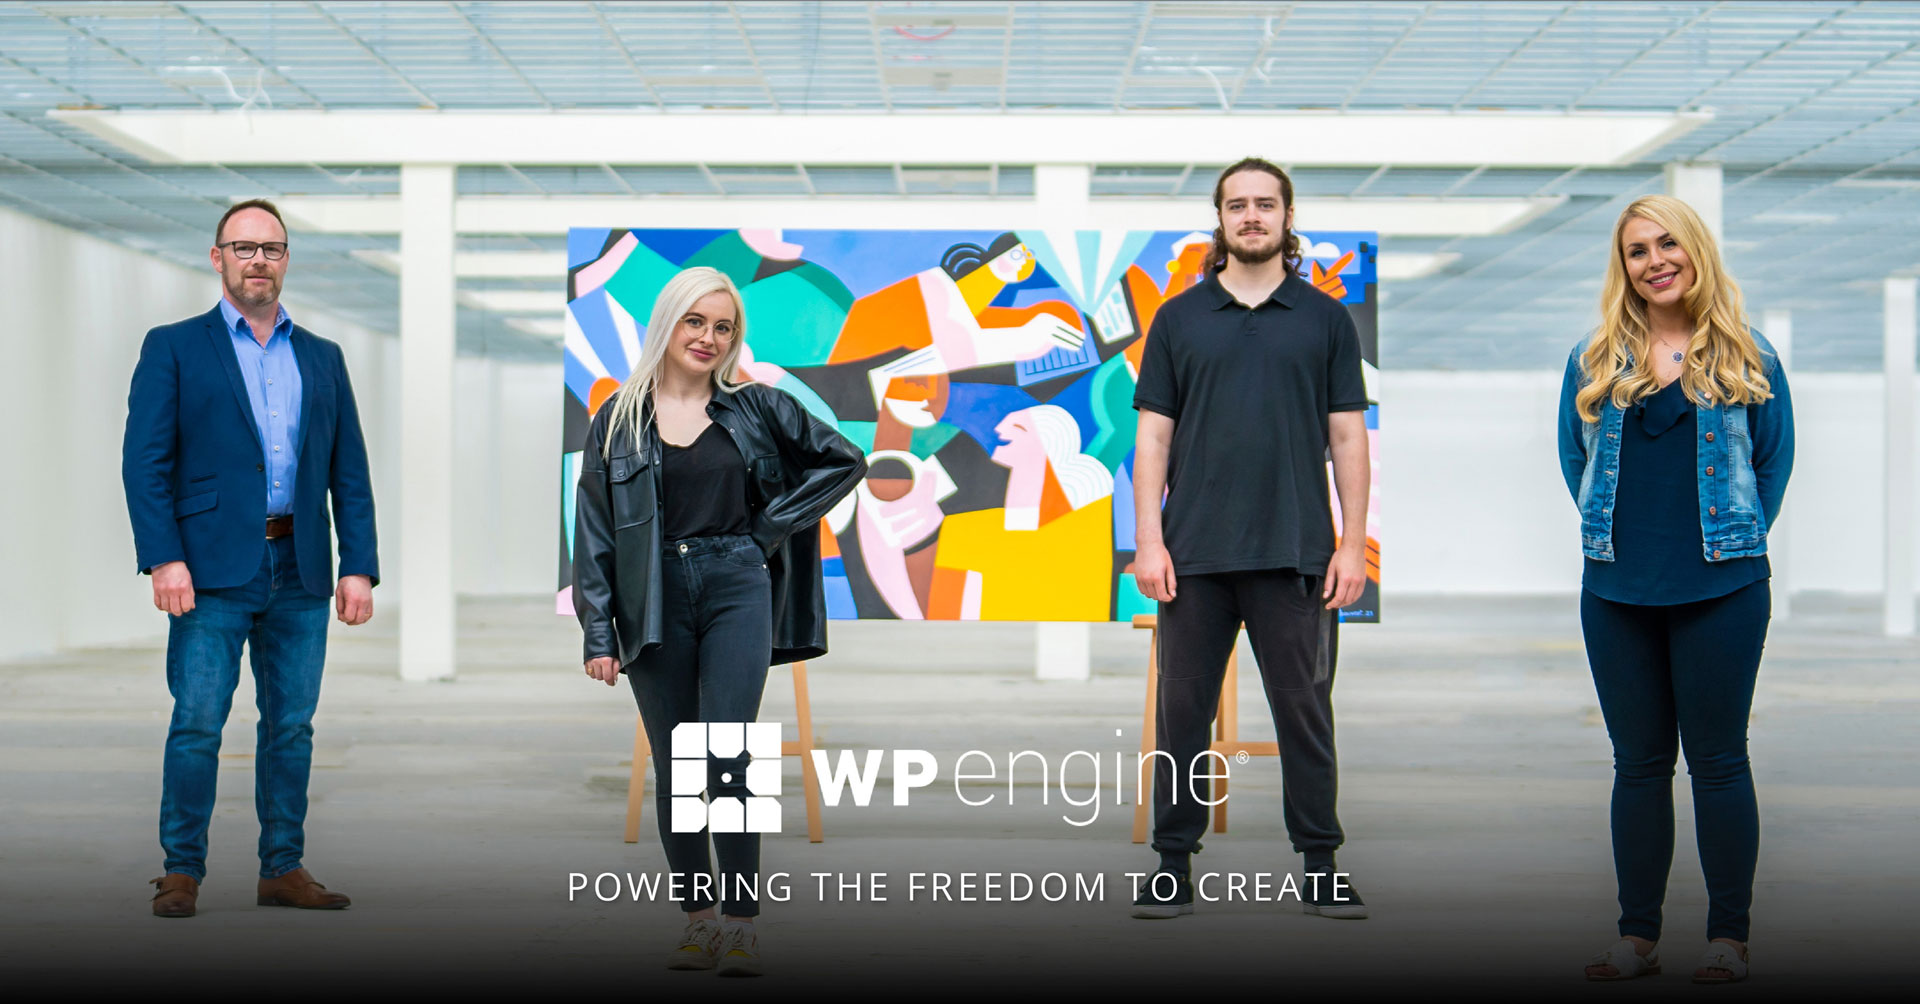 WP Engine 'Powering The Freedom to Create'